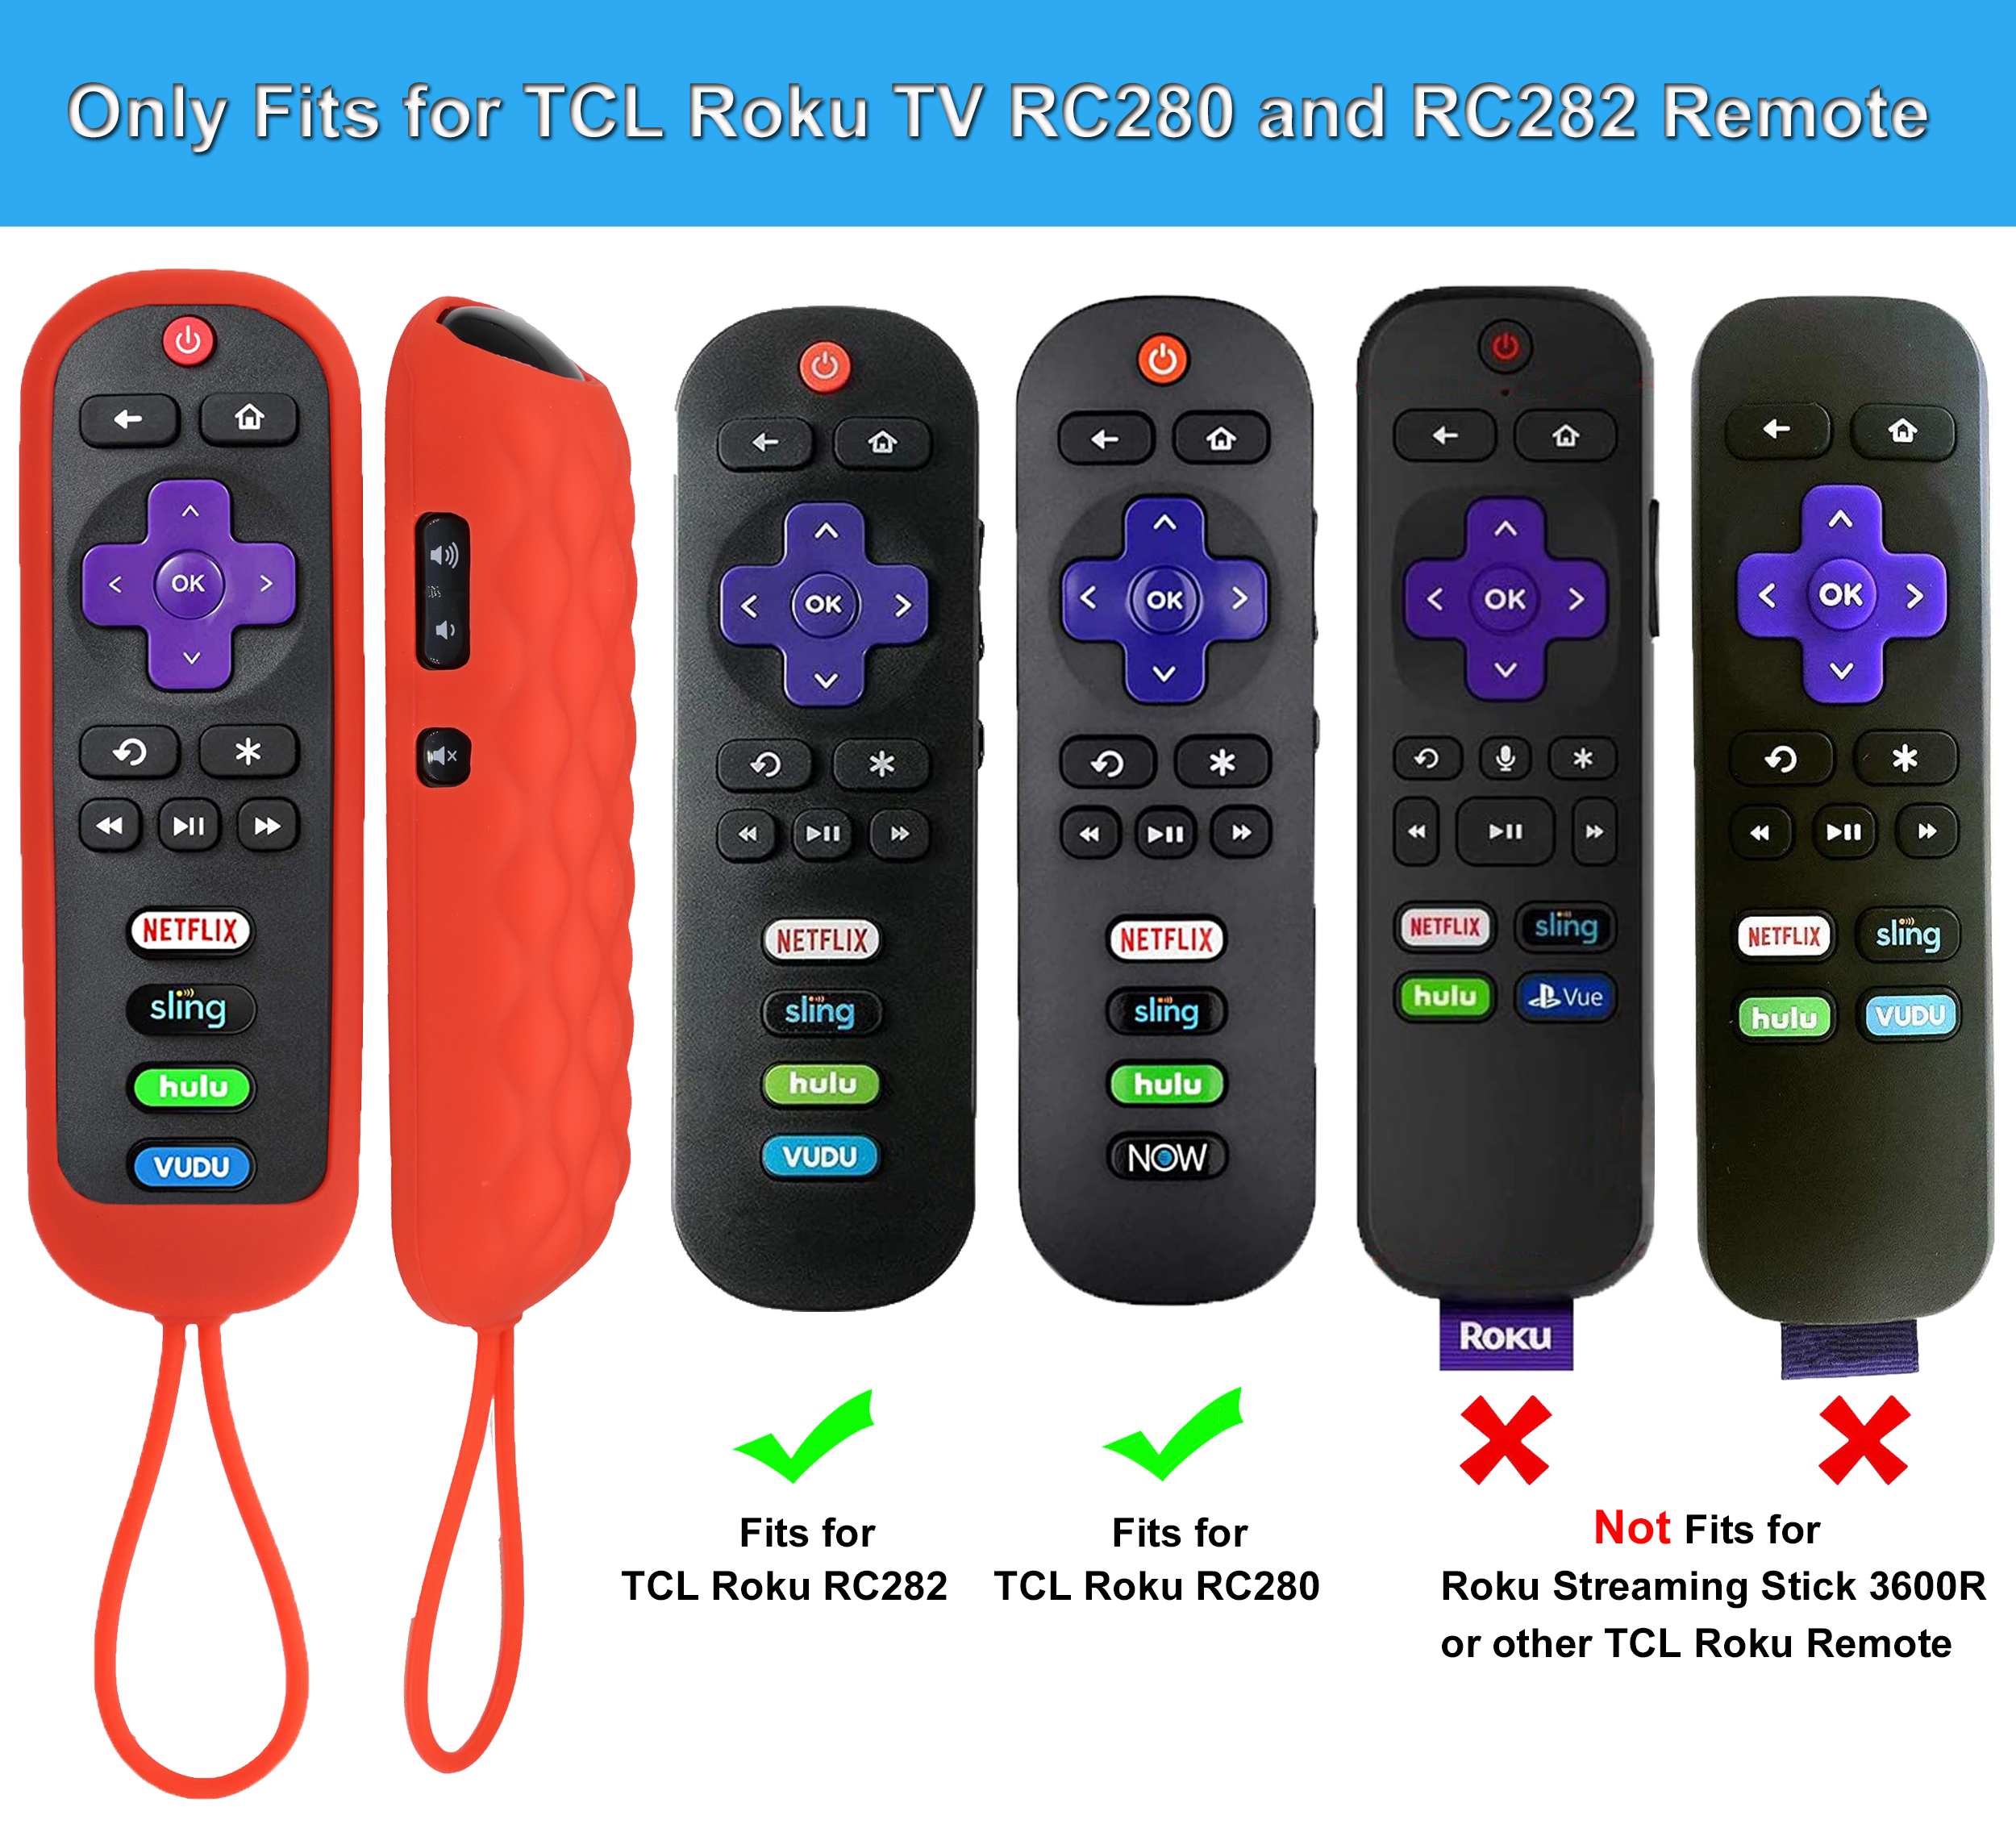 TOKERSE Silicone Cover Case for TCL Roku RC280 RC282 TV Remote - Universal Replacement Protective Remote Cover Case Skin Sleeve with Lanyard for TCL Roku TV RC280 RC282 Remote Control - Red